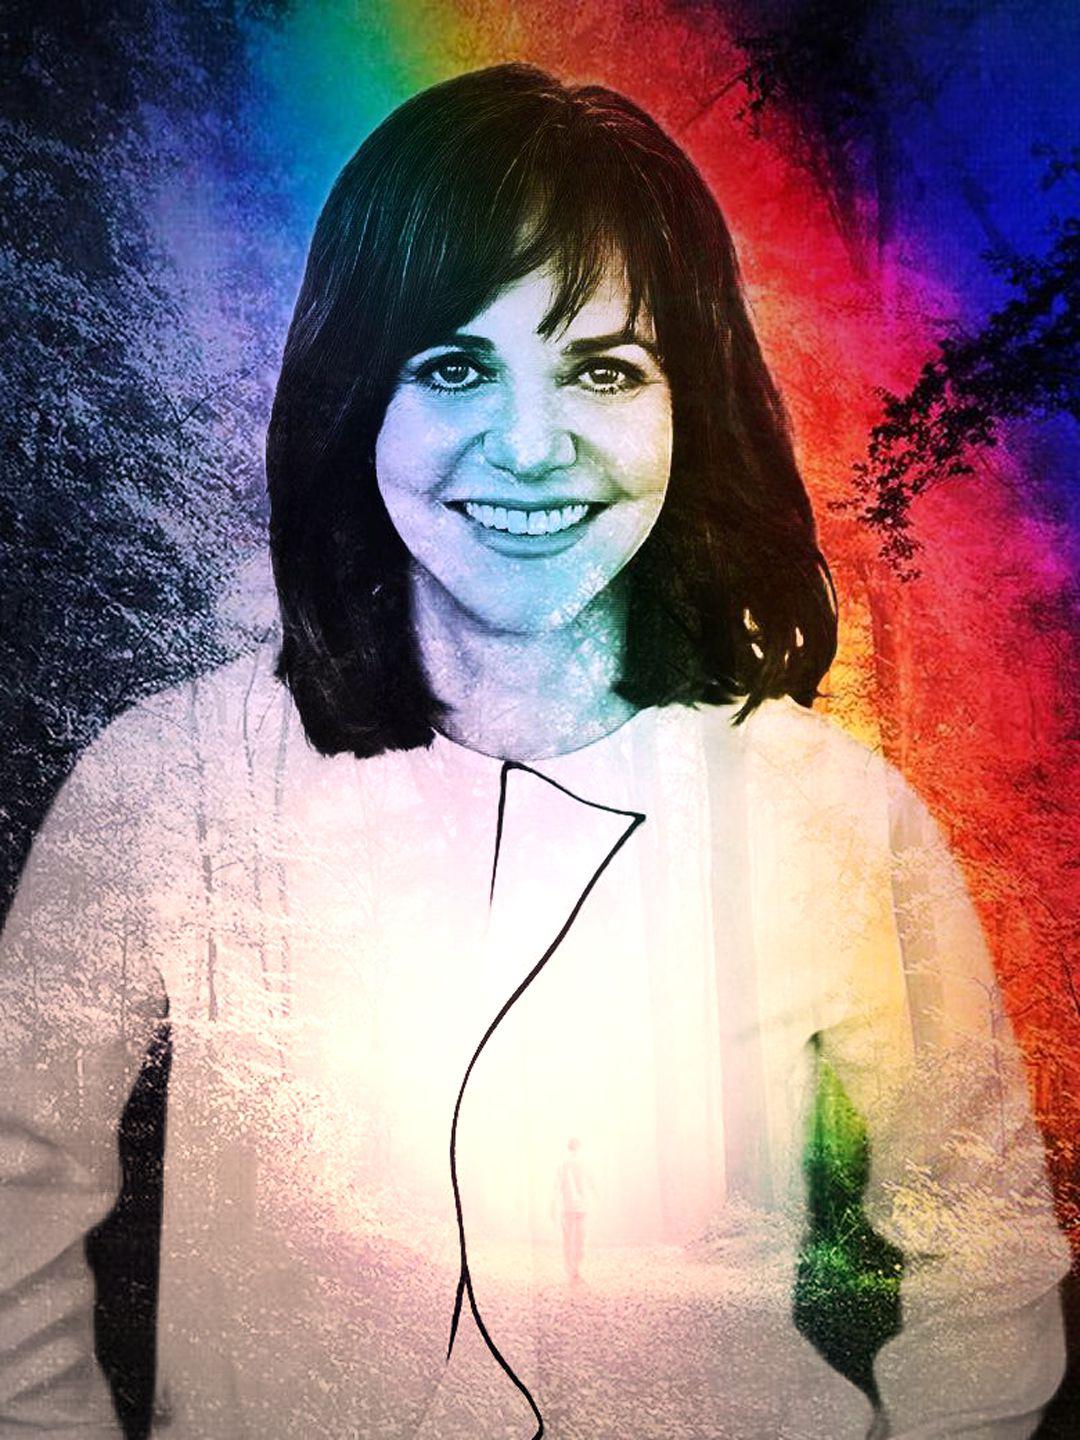 Anna Faris Black Hair Pussy - Sally Margaret Field - Celeb ART - Beautiful Artworks of Celebrities,  Footballers, Politicians and Famous People in World | OpenSea